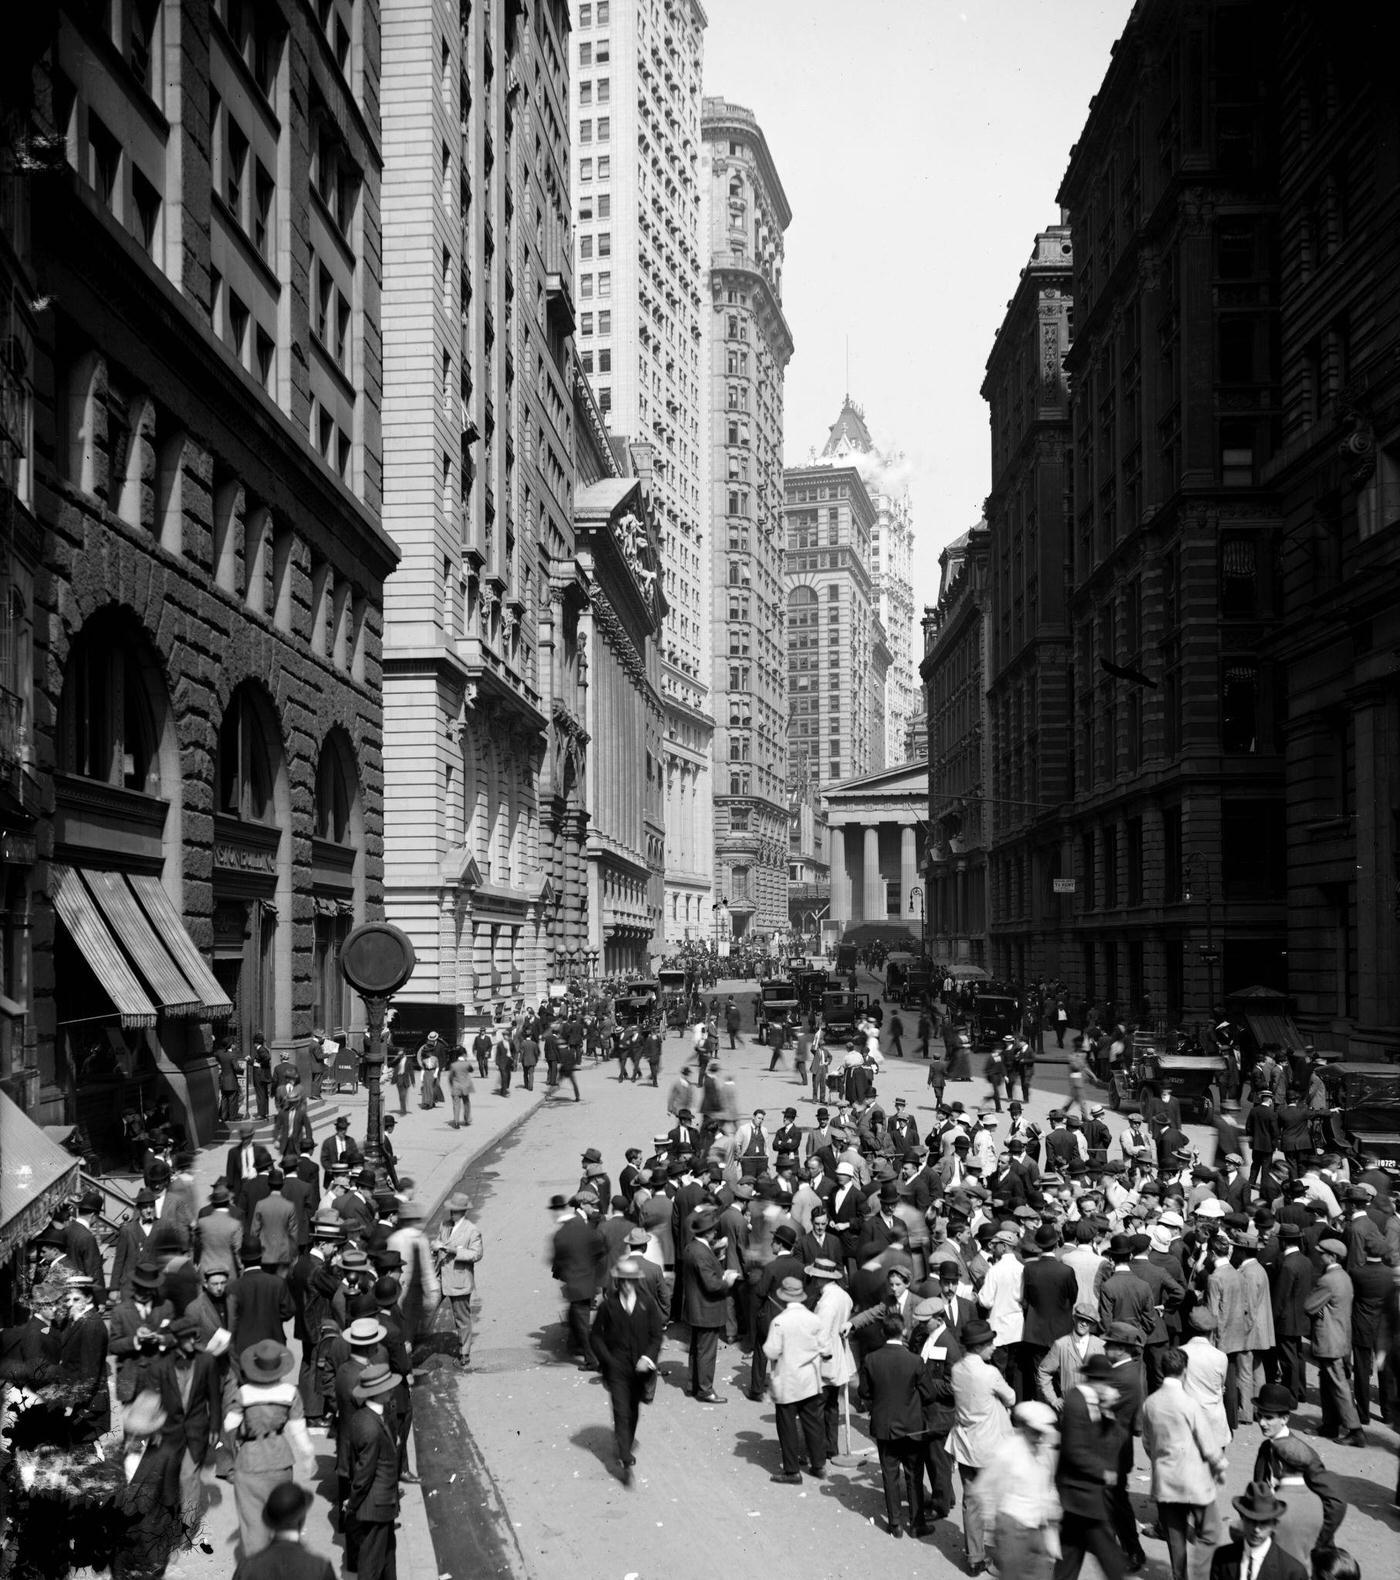 Curb Brokers Or Curbstone Brokers Trading On The Street Near Broad Street And Wall Street, New York City, 1915